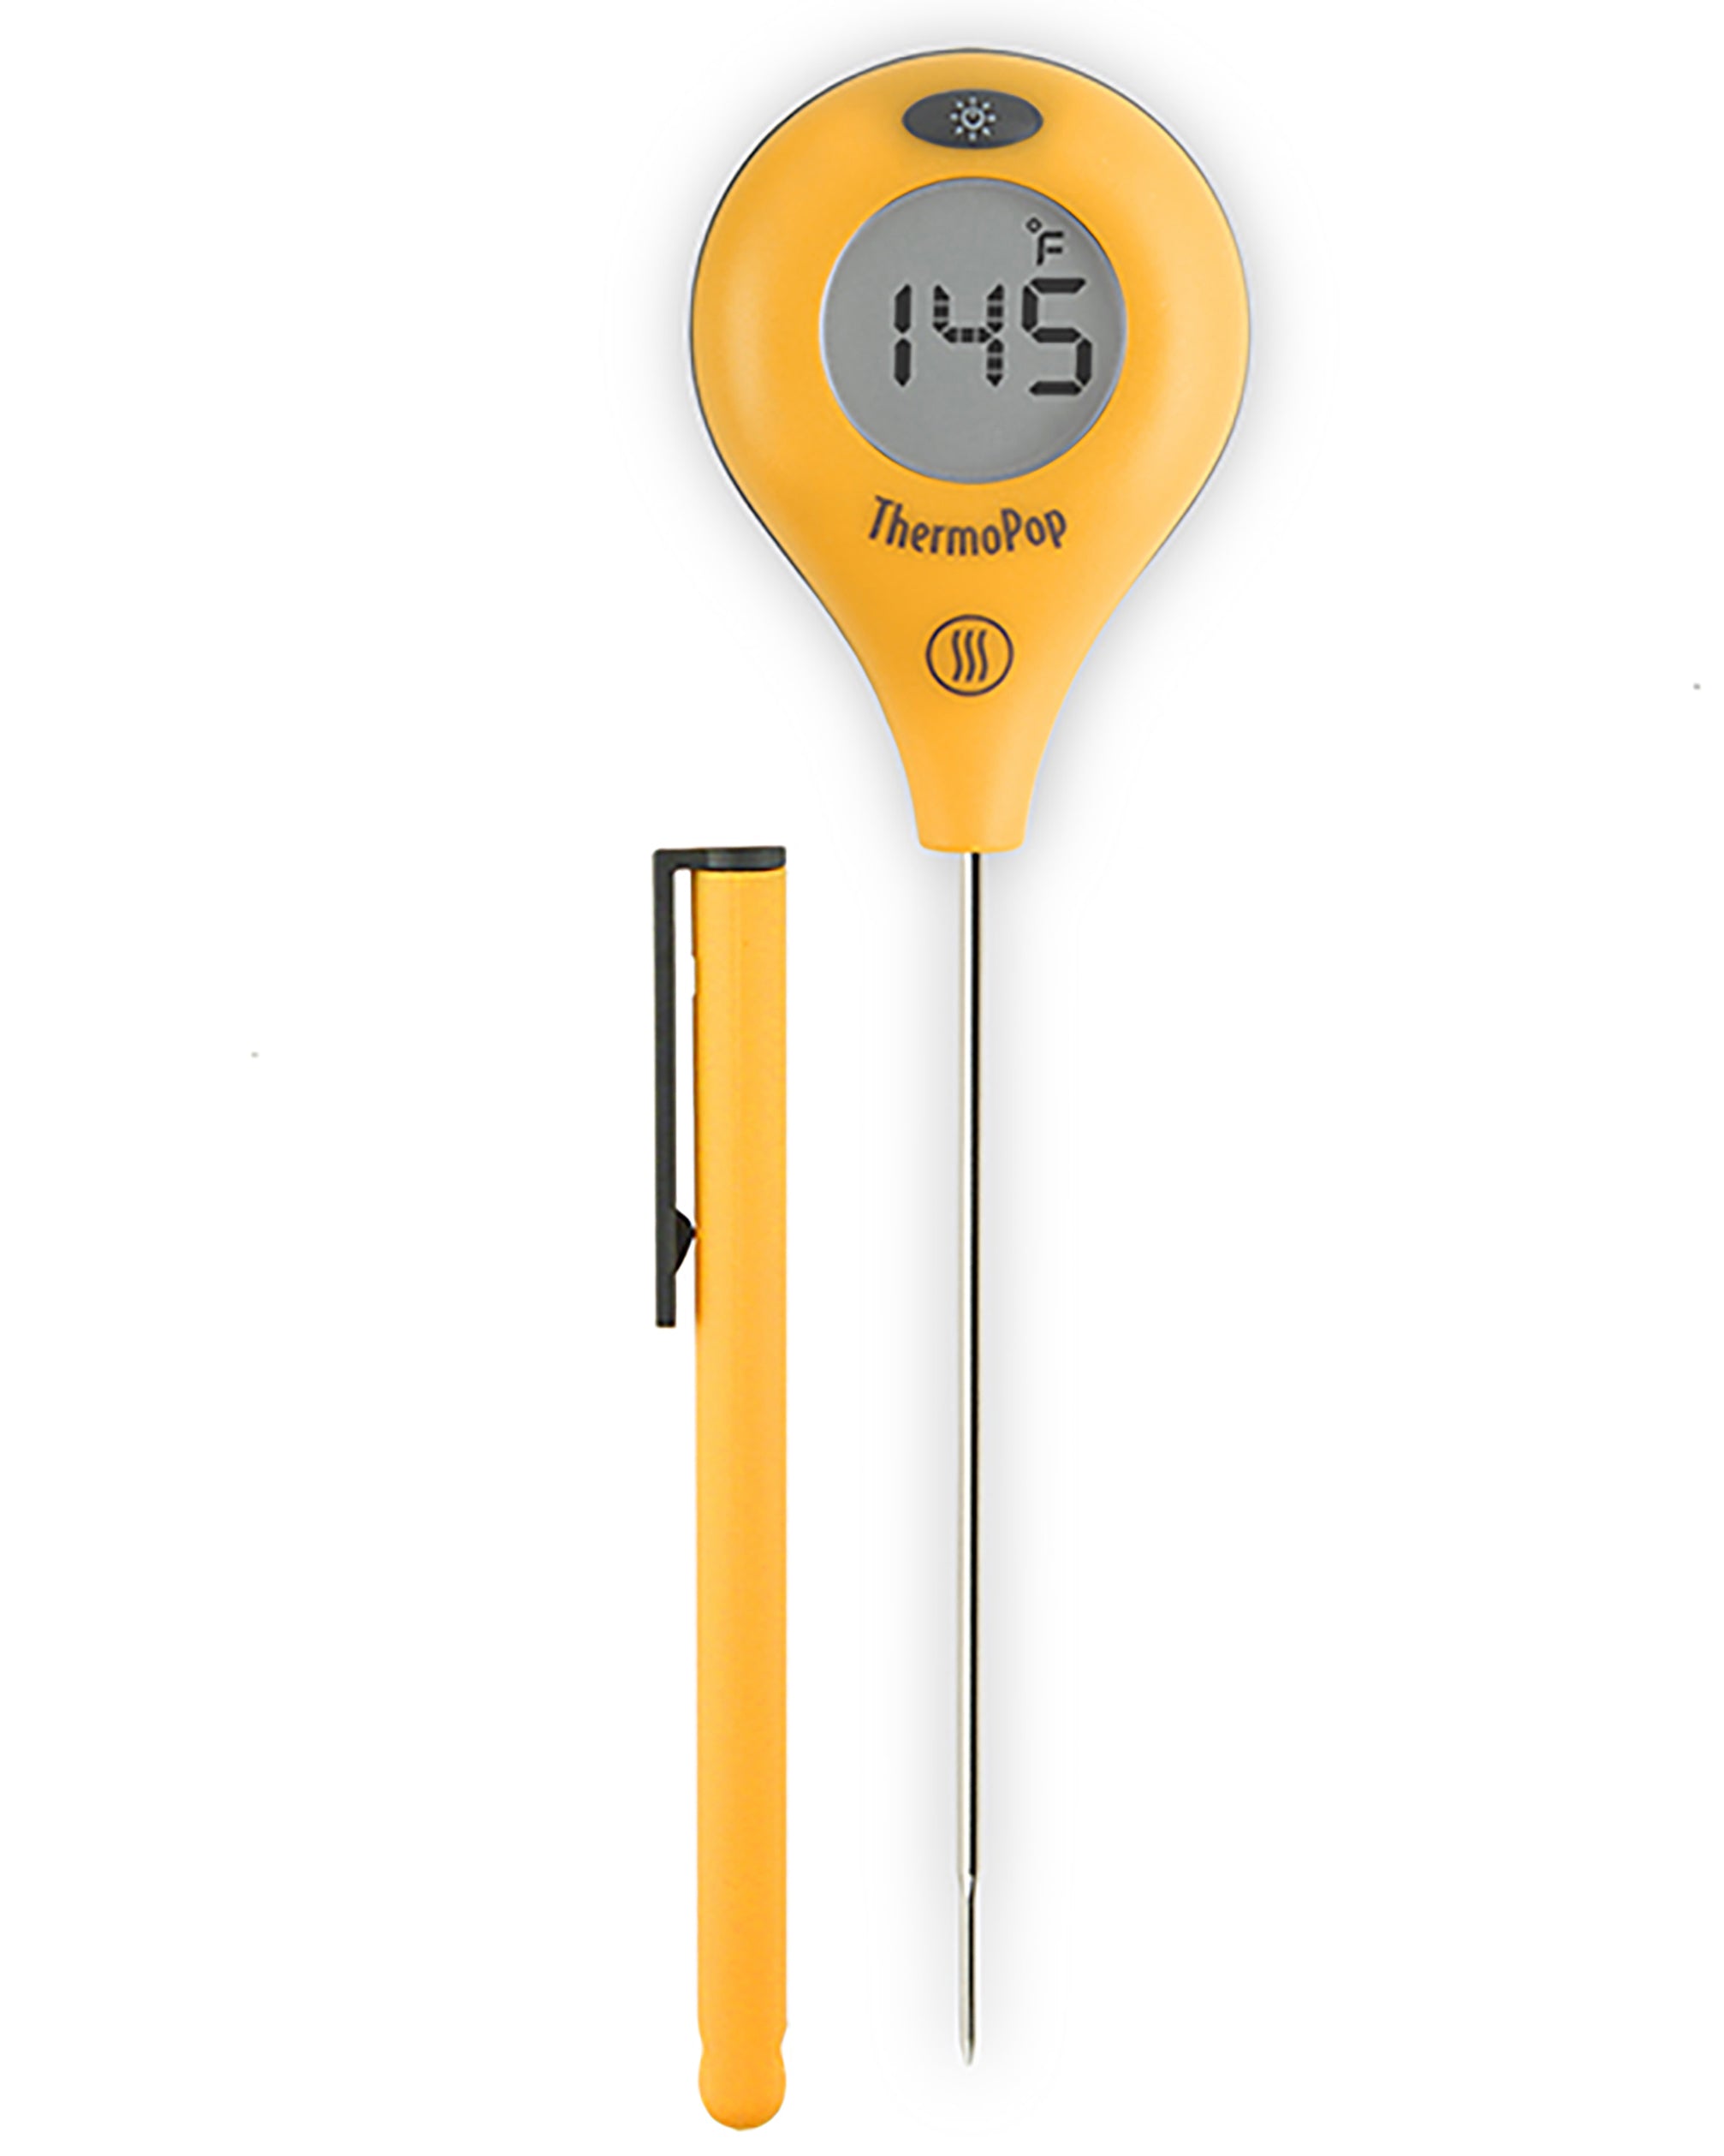 Thermaworks Thermopop Thermometer Review - Worth $35? 